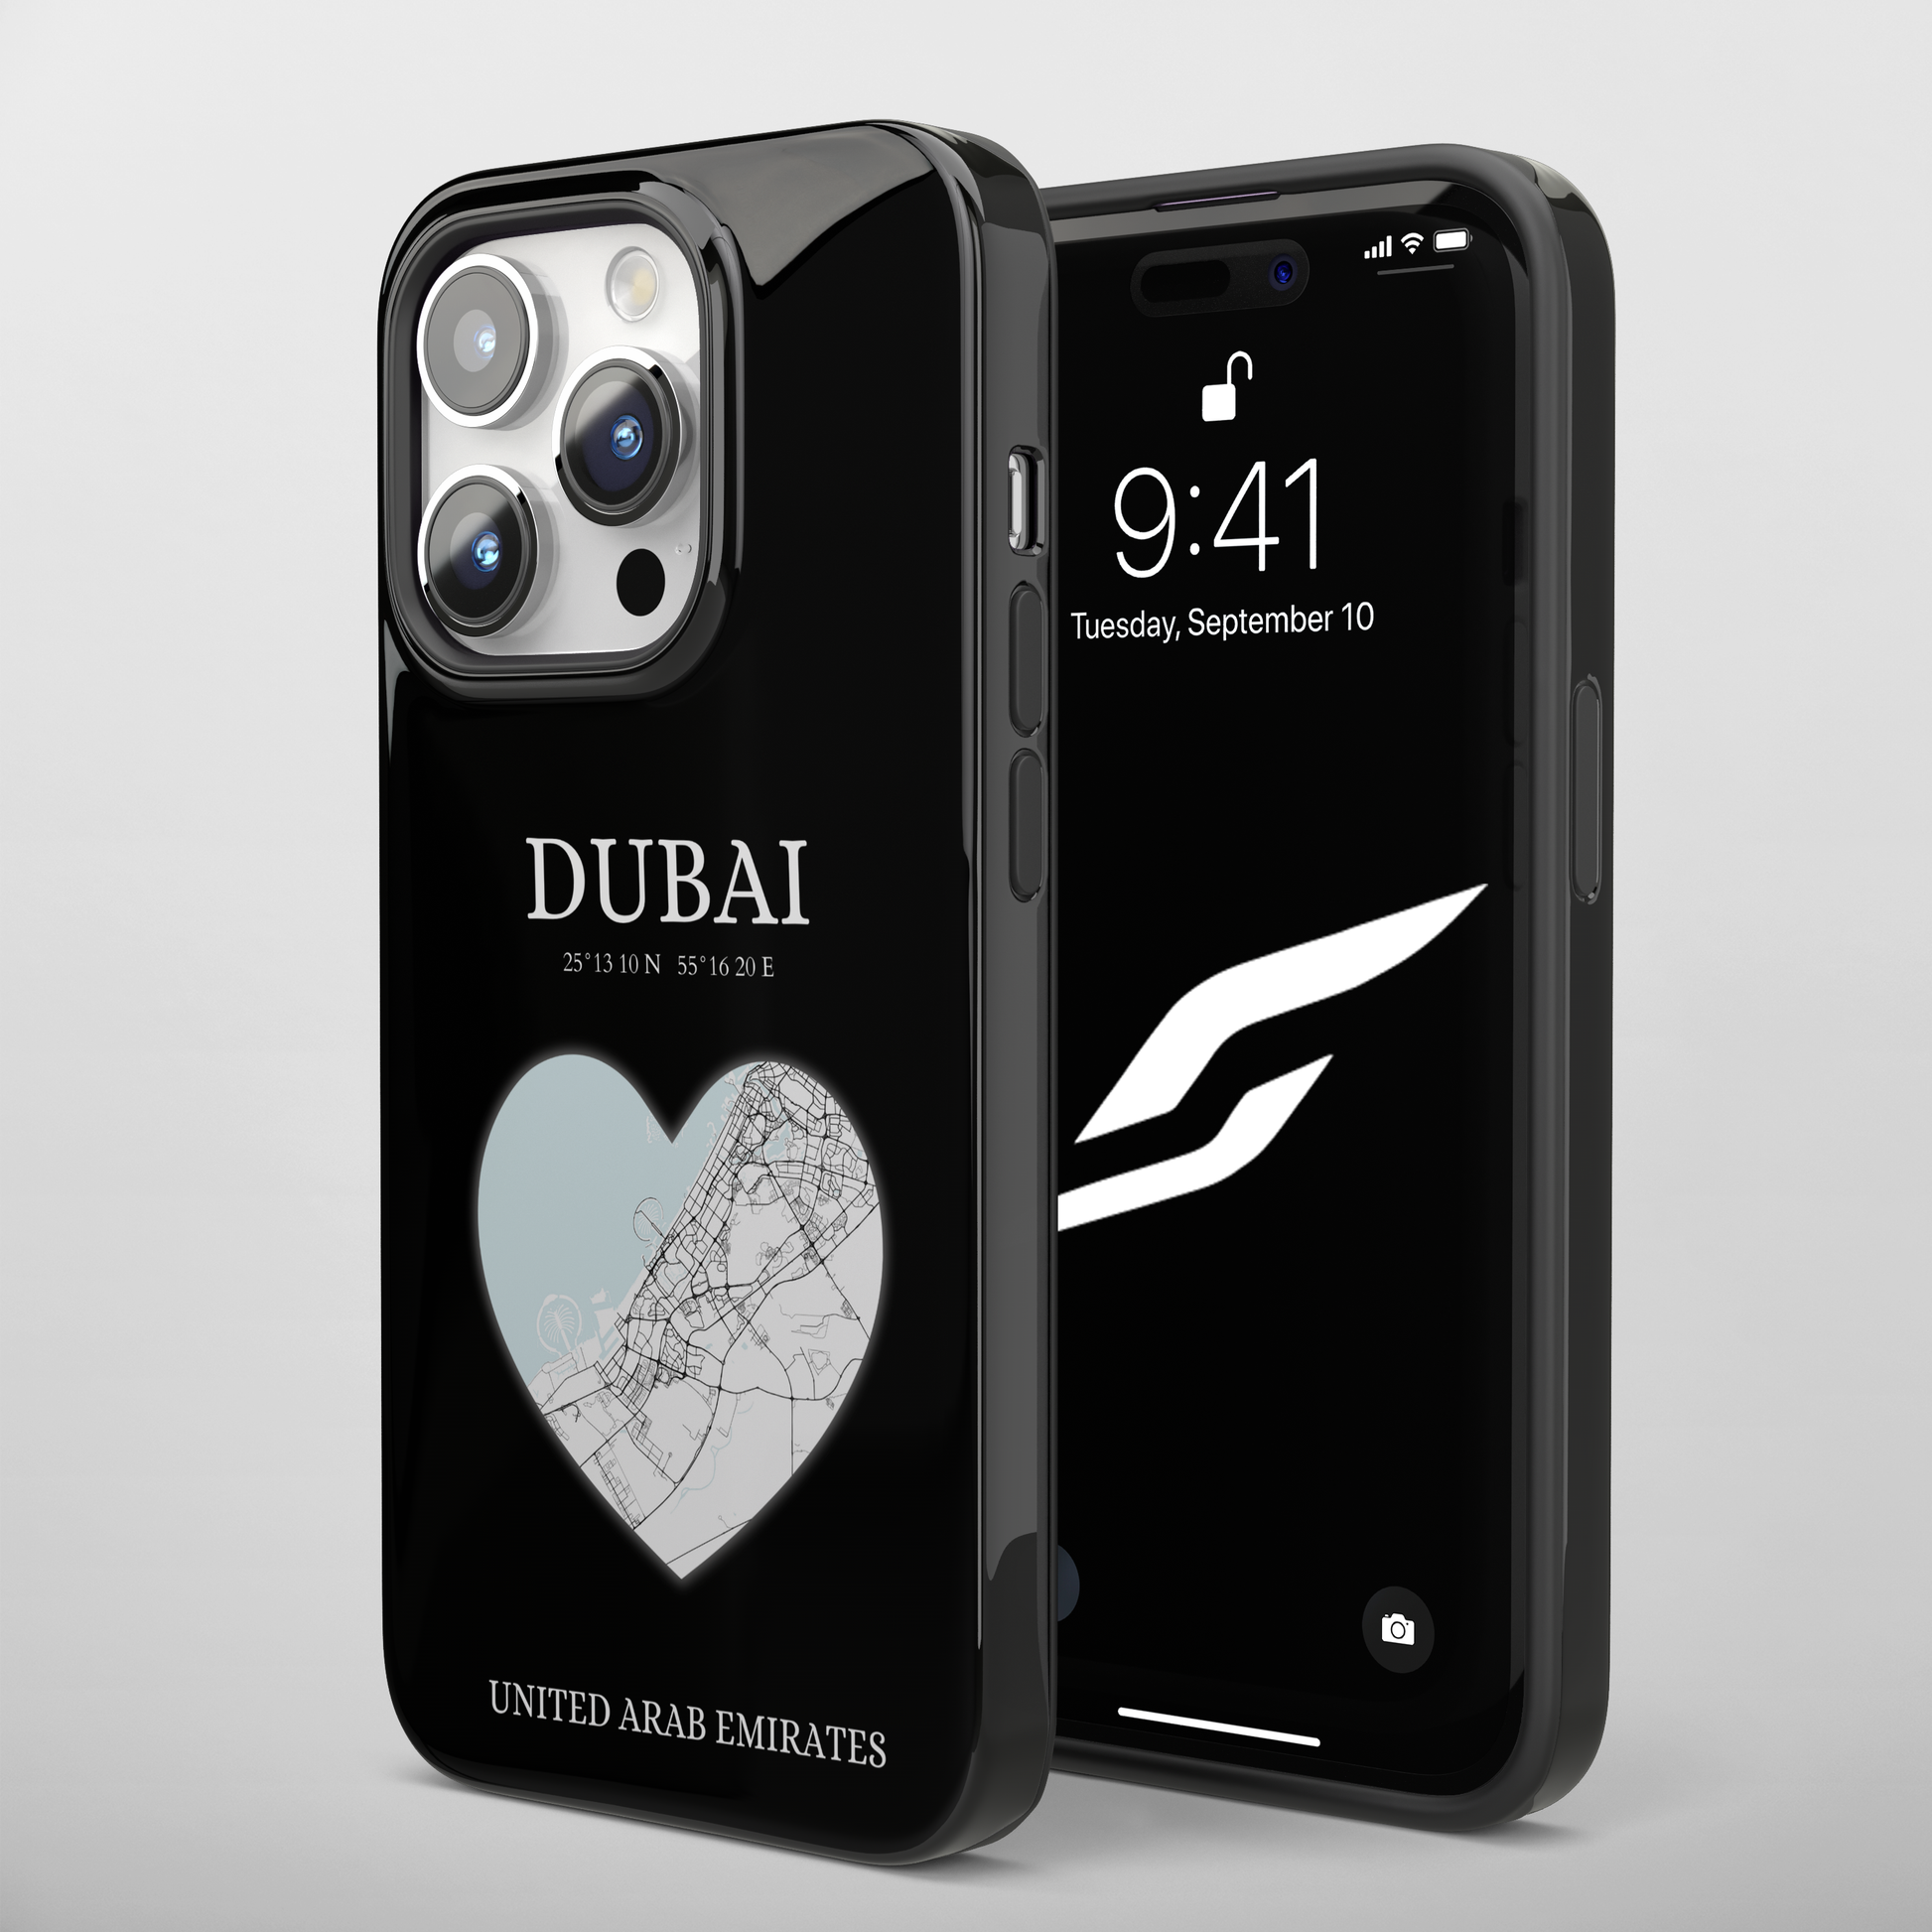 Dubai Heartbeat - Black (iPhone Case 11-15)Elevate your iPhone with RimaGallery's Dubai York Heartbeat case. Sleek design meets durability for stylish protection. Free US shipping.RimaGallery